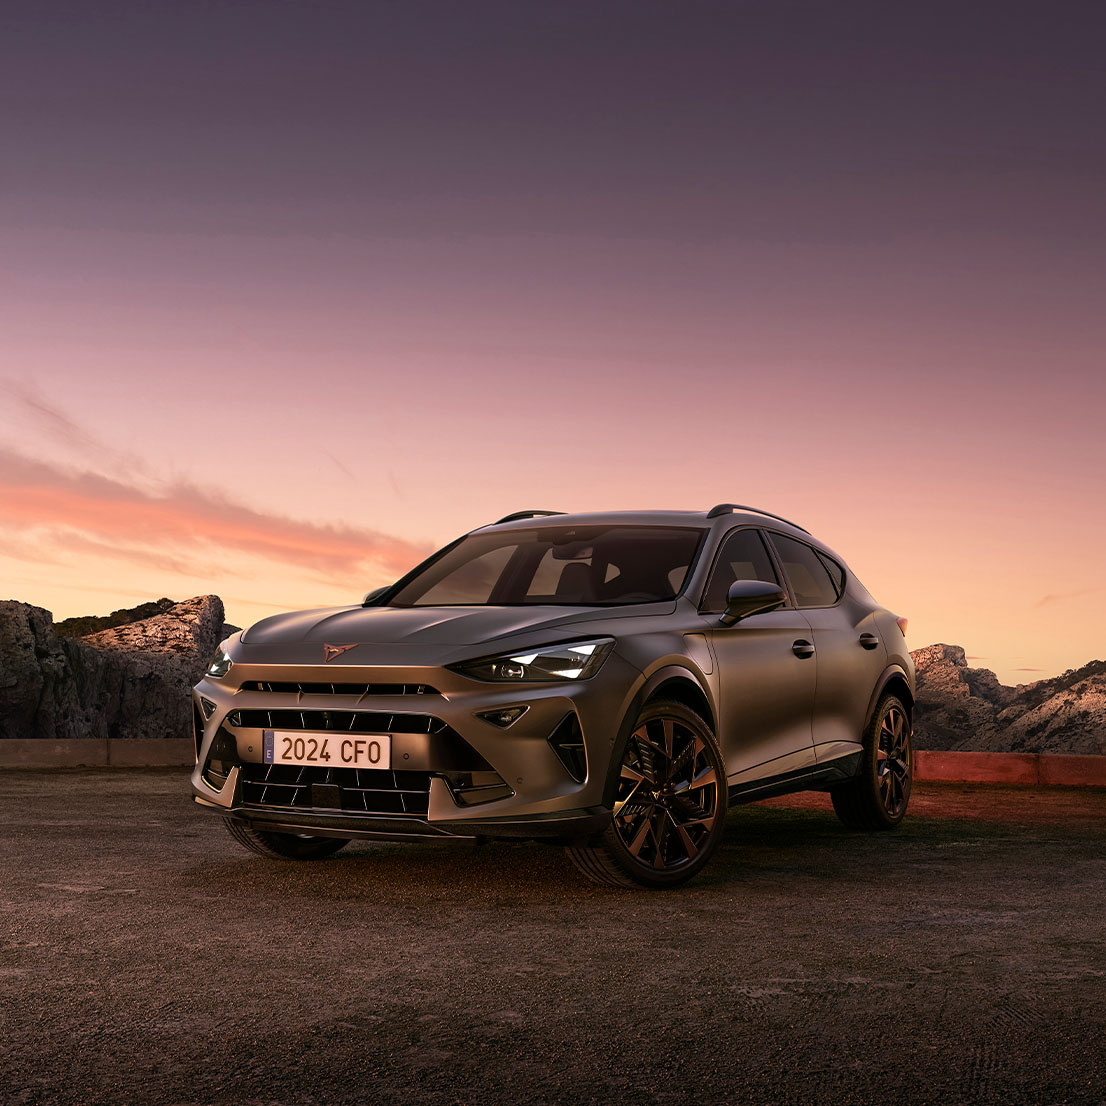 A three-quarter view of the new CUPRA Formentor 2024 parked on gravel at dusk, featuring a sleek, metallic body against a backdrop of rugged cliffs and ethereal sunset